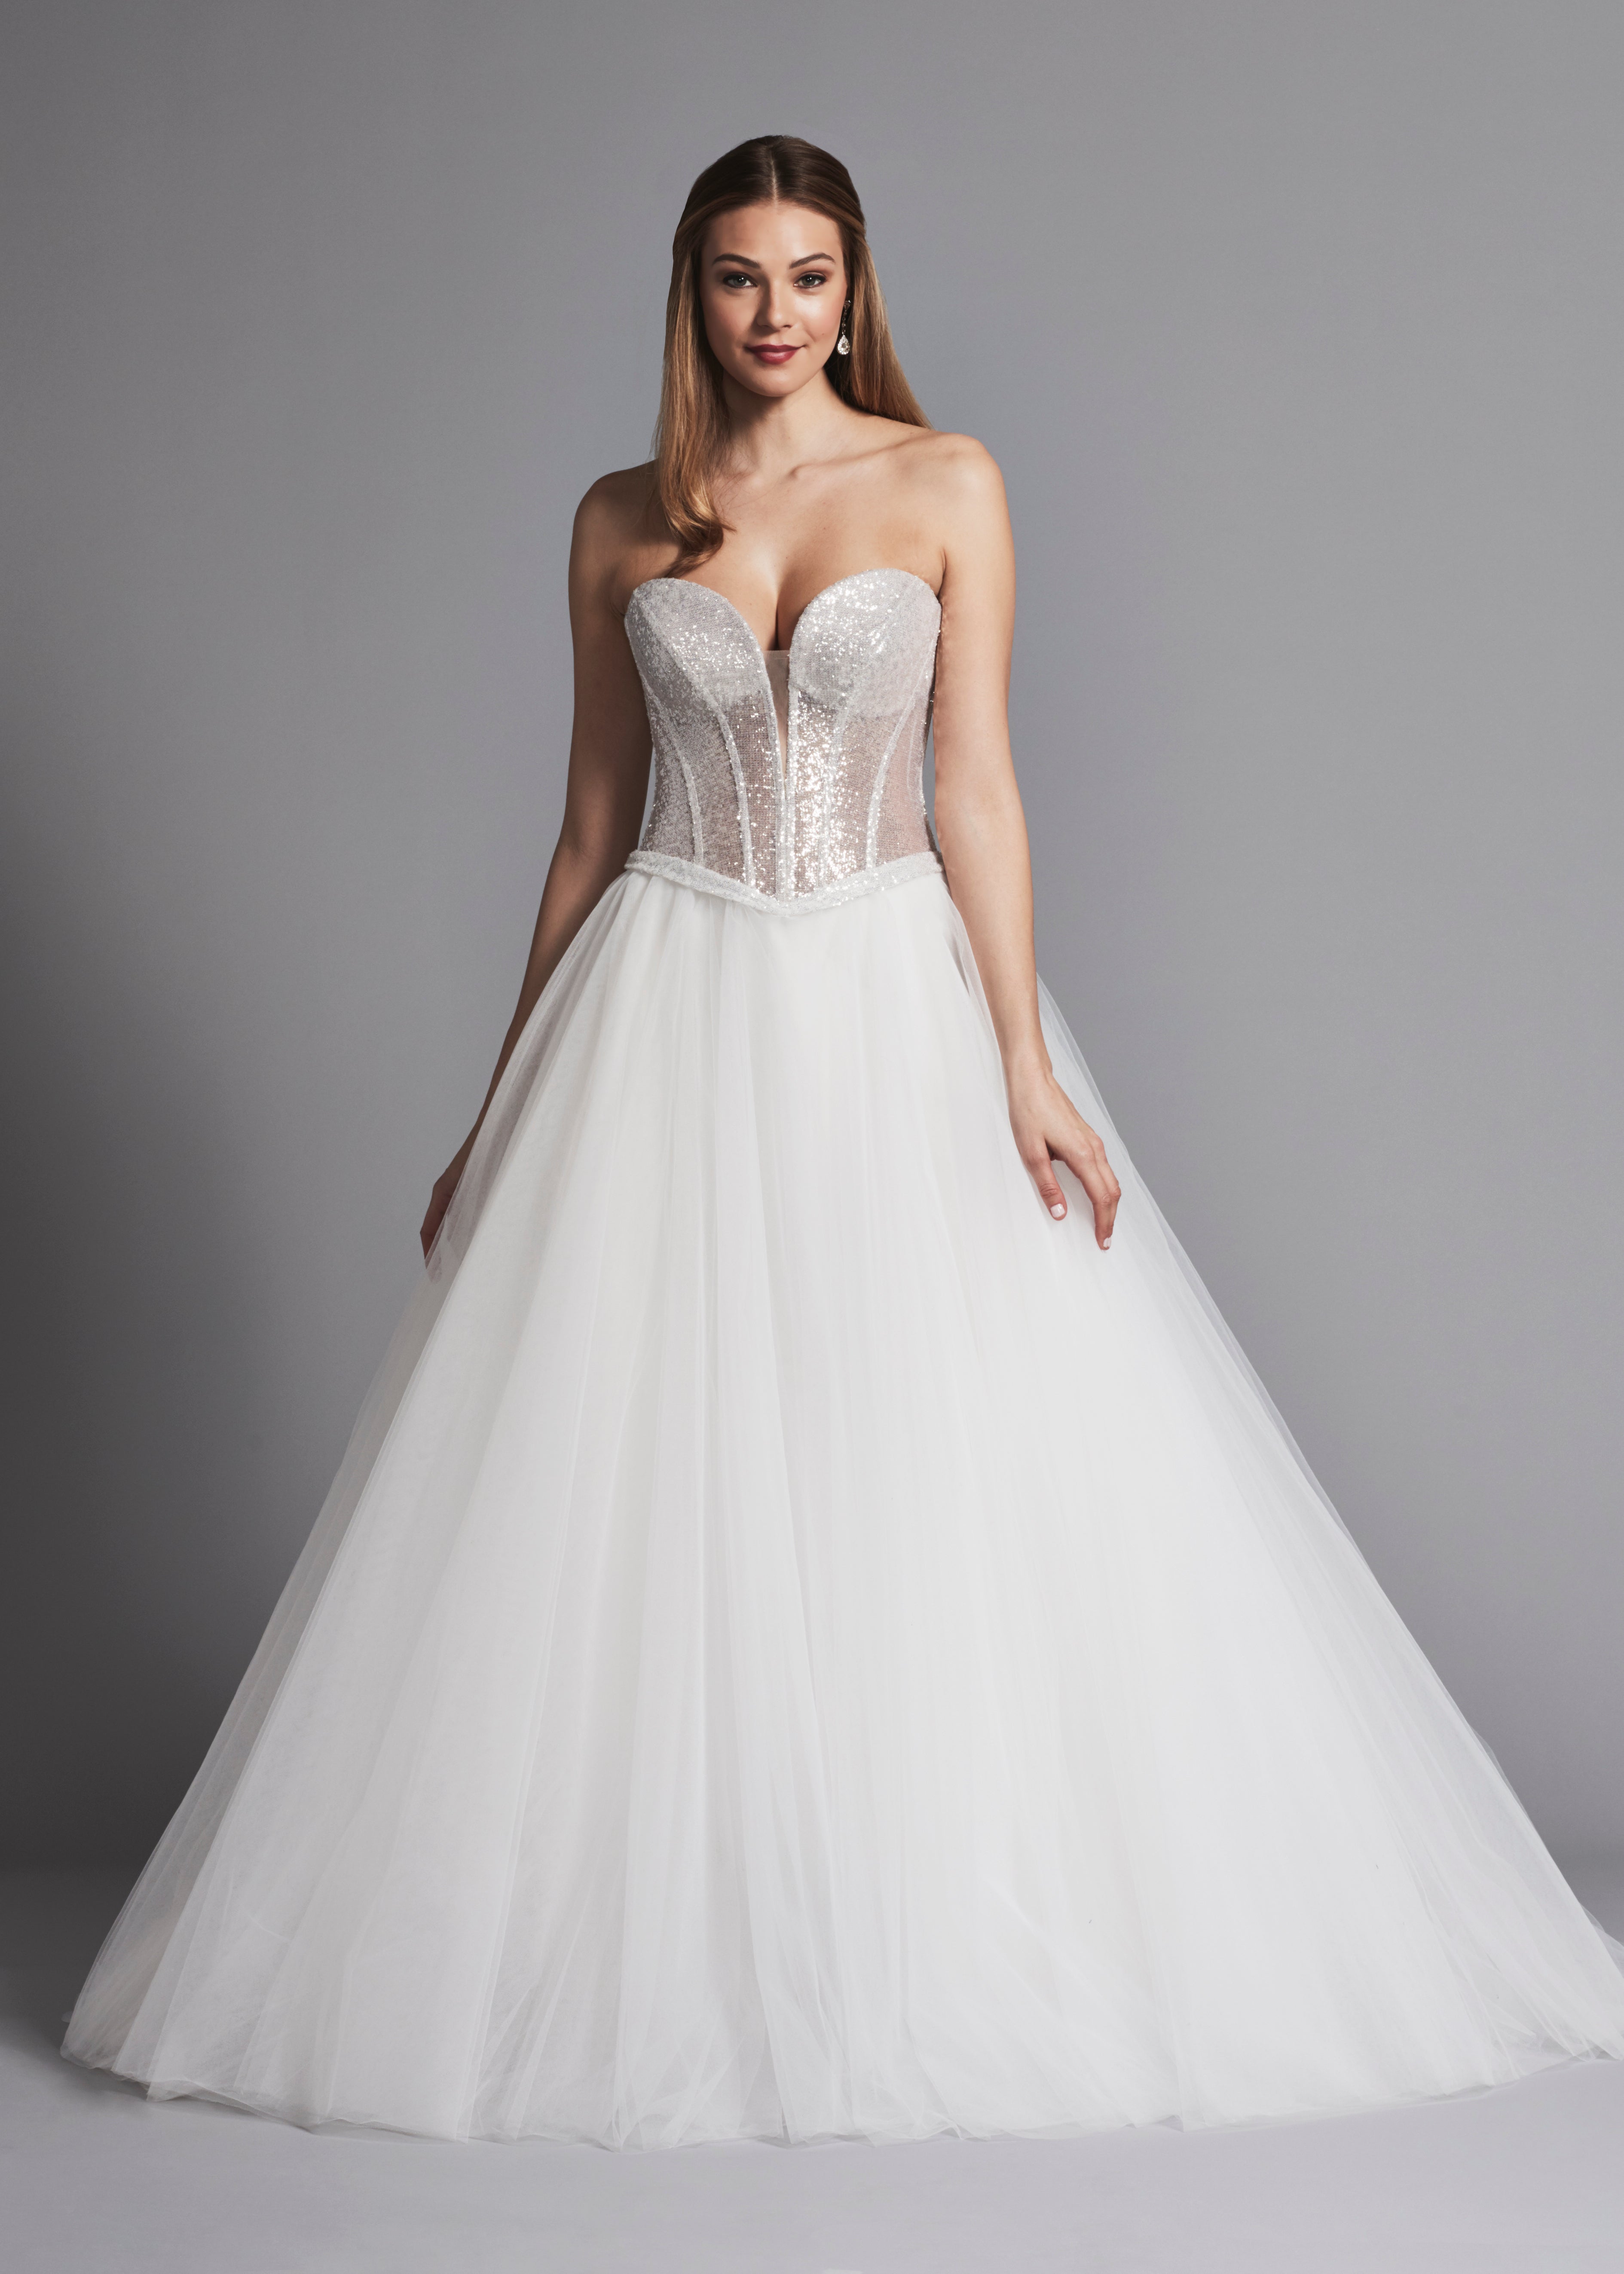 Featured image of post Tulle Wedding Dress With Corset Satin Bodice - 1834 x 2630 jpeg 596 kb.